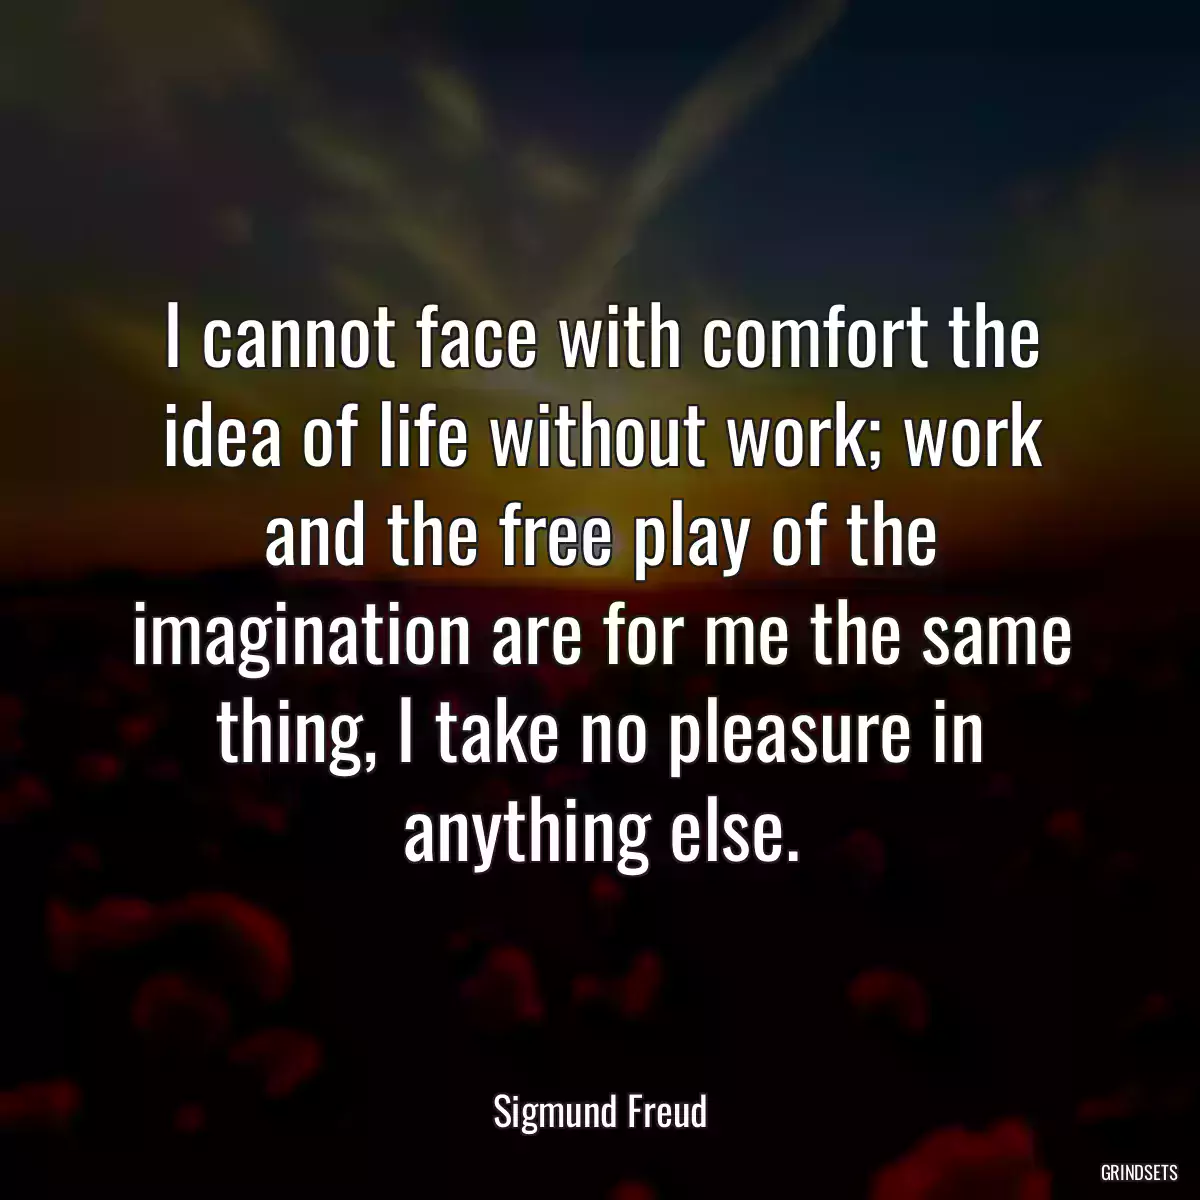 I cannot face with comfort the idea of life without work; work and the free play of the imagination are for me the same thing, I take no pleasure in anything else.